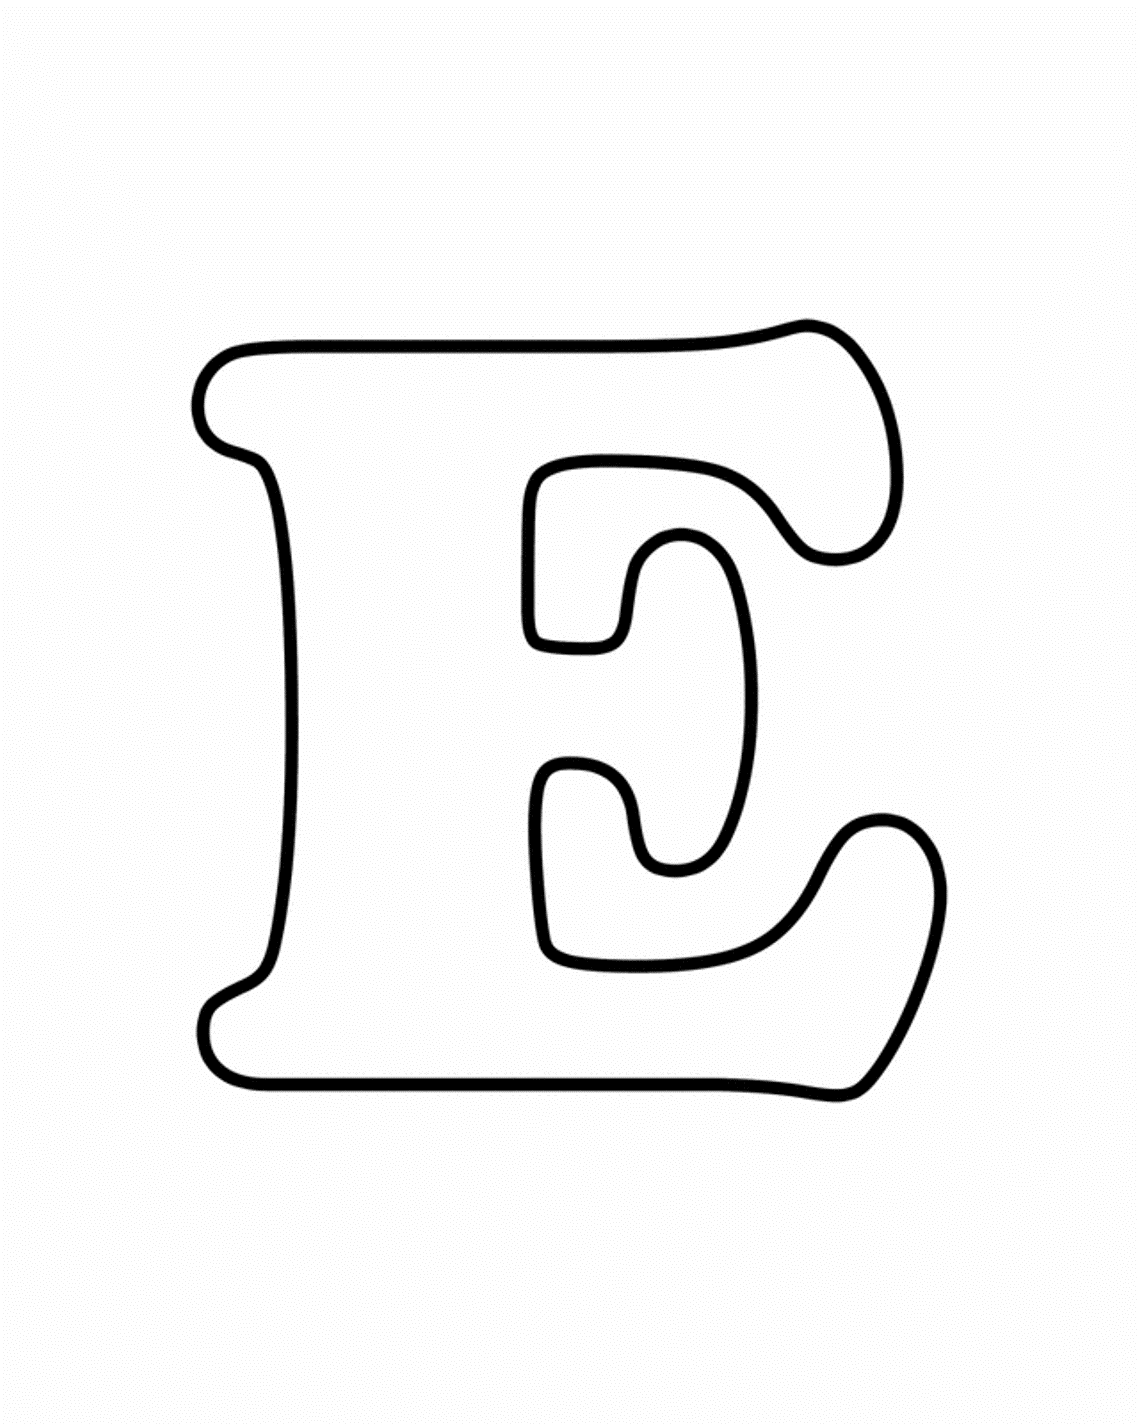 free-letter- e -printable-coloring-pages-for-preschool - Preschool Crafts